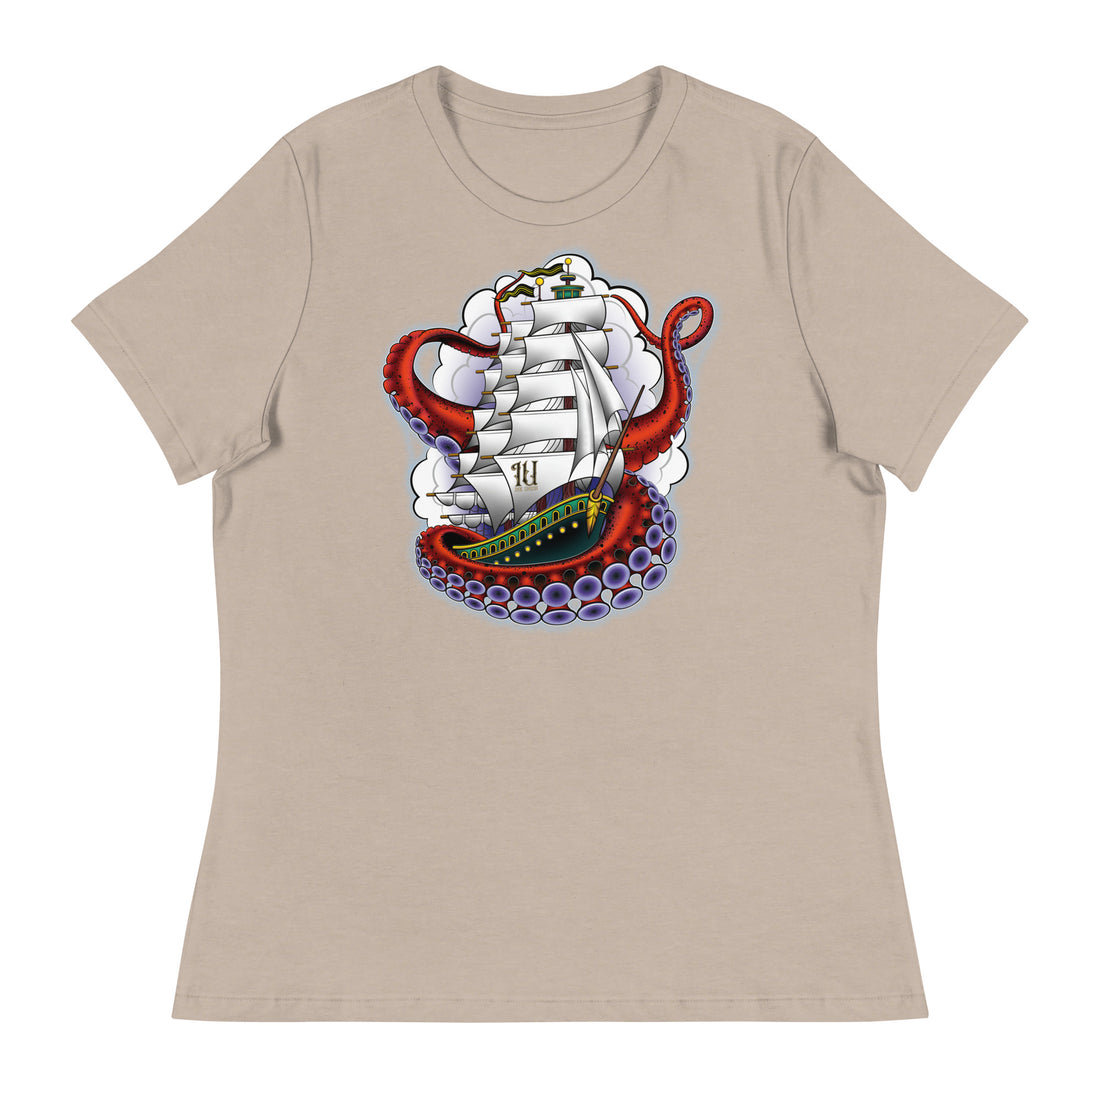 A sandy brown t-shirt with an old-school clipper ship tattoo design in green and brown with white sails surrounded by octopus tentacles in shades of red with purple tentacles. Behind the ship are purple-tinged clouds.